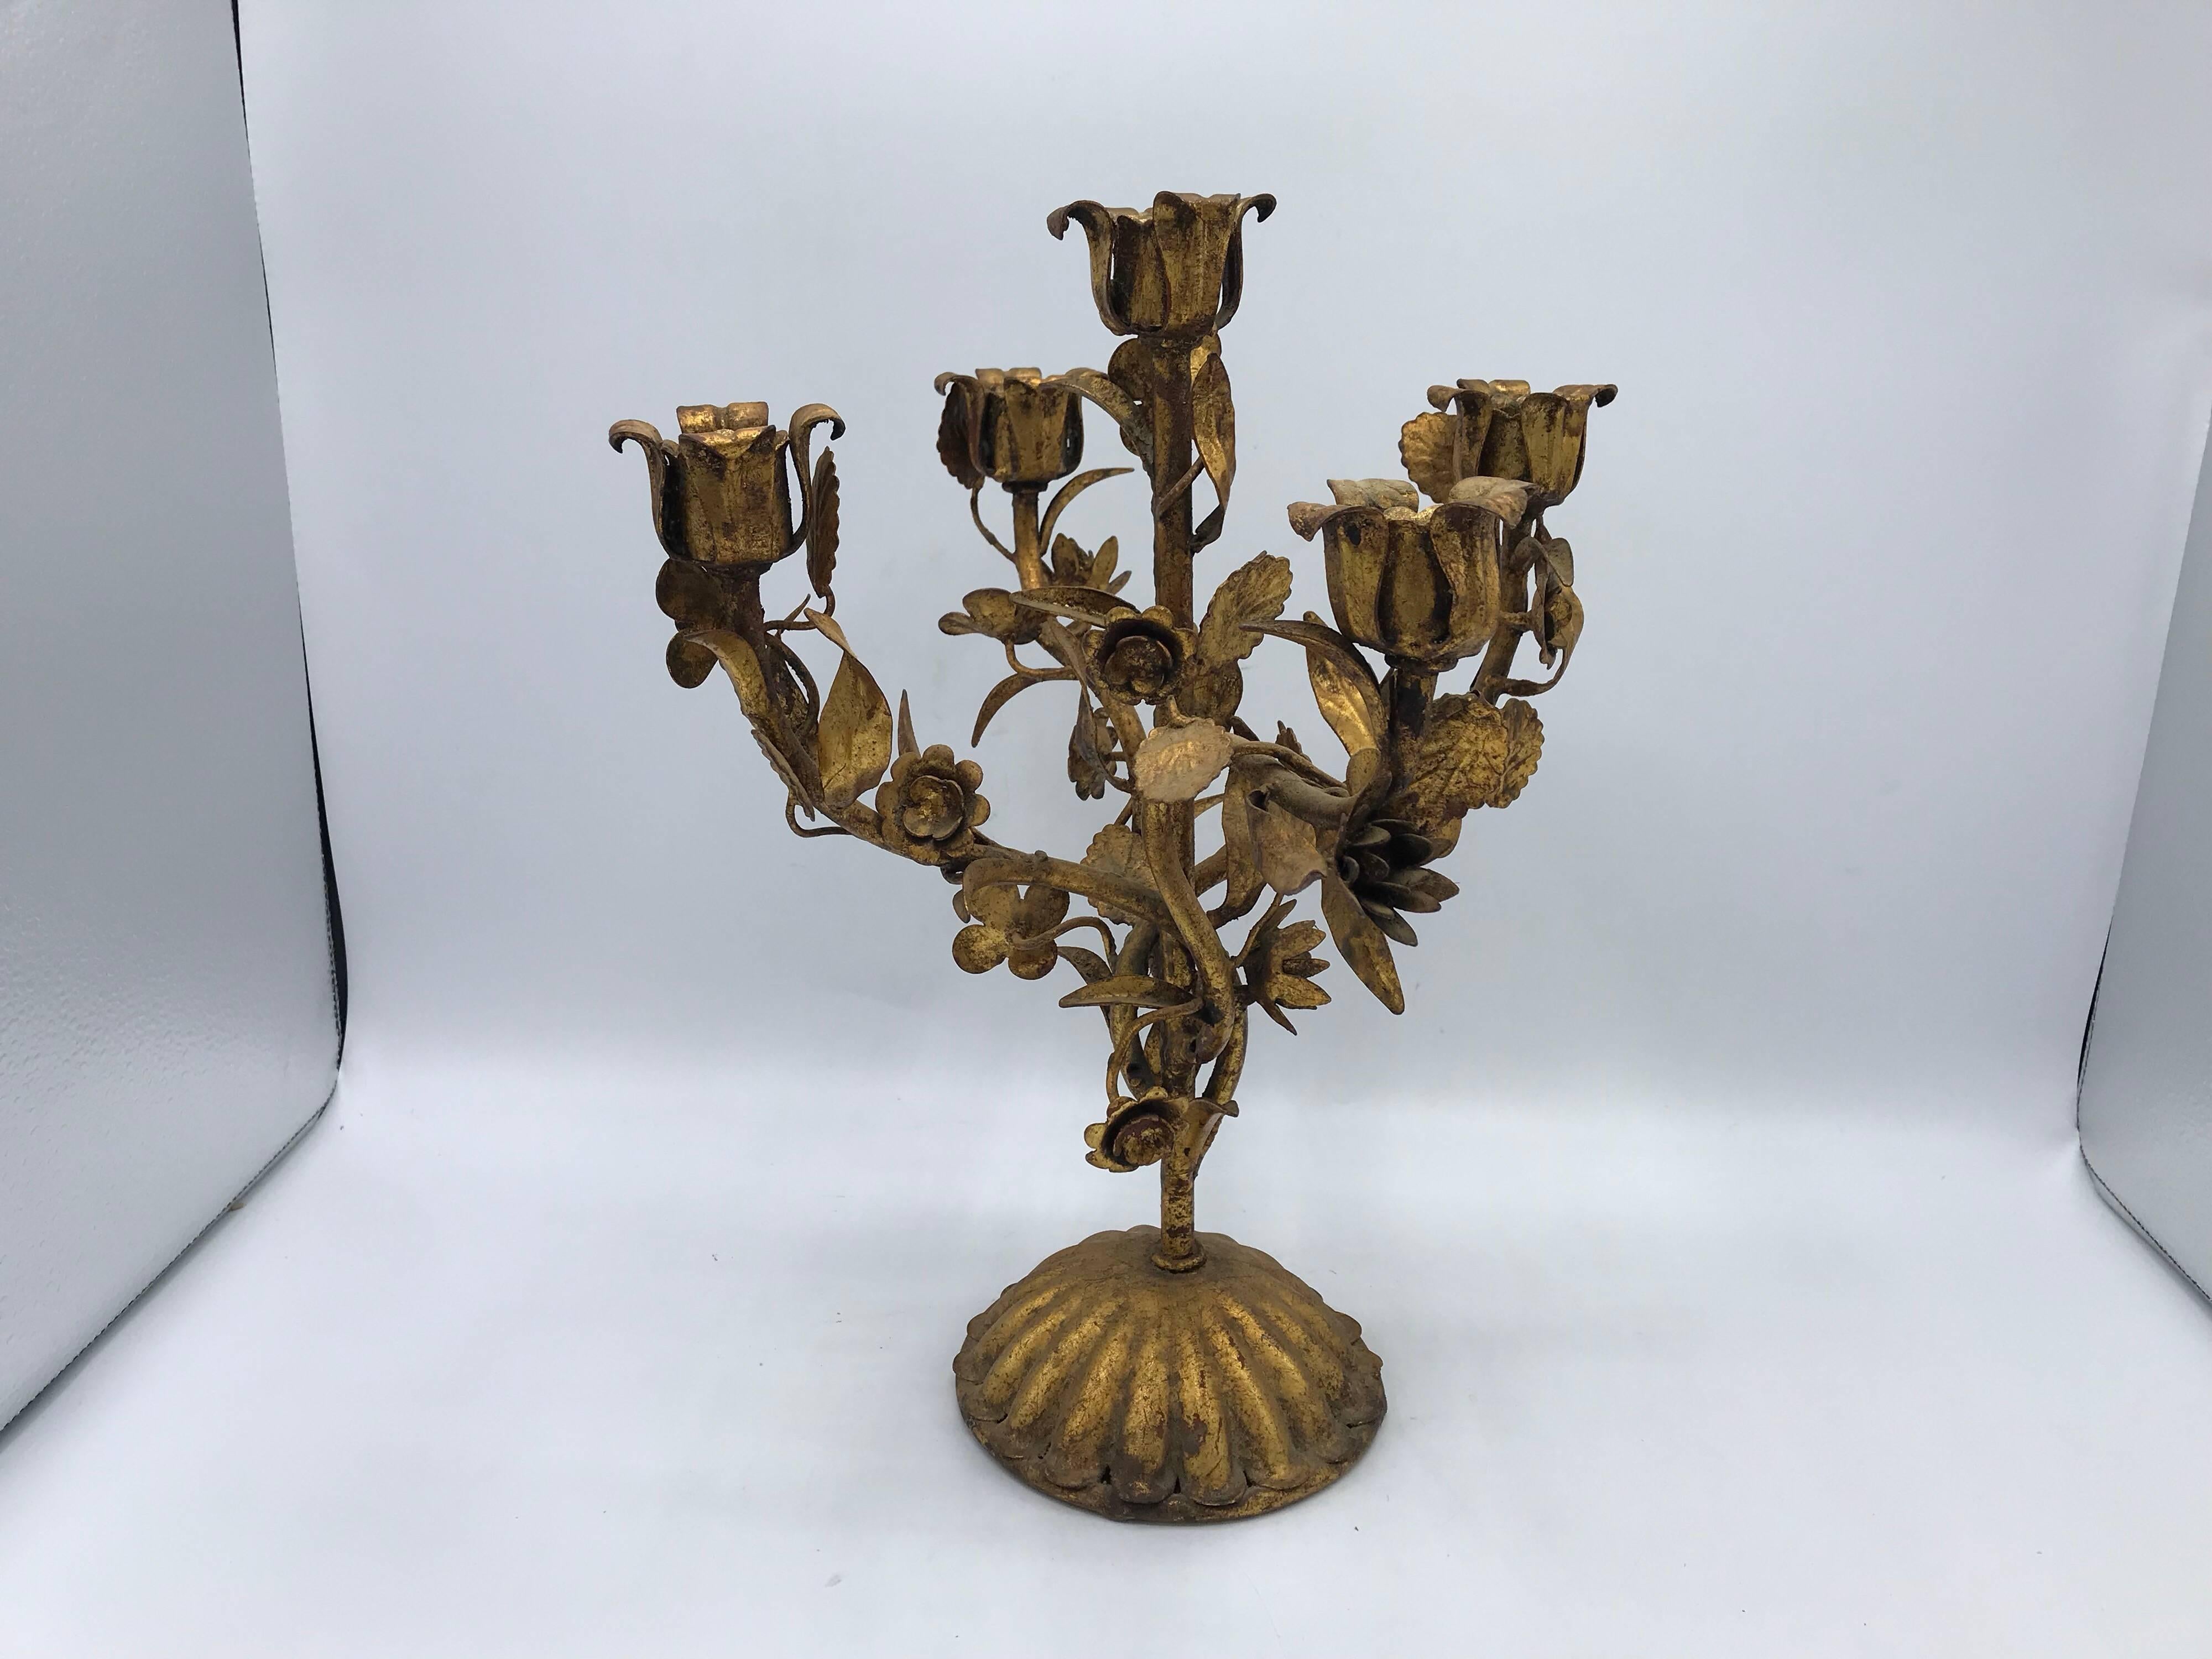 Listed is a stunning, 1960s Italian Florentine gilded-metal five-arm candelabra with a rose and vine sculptural motif.